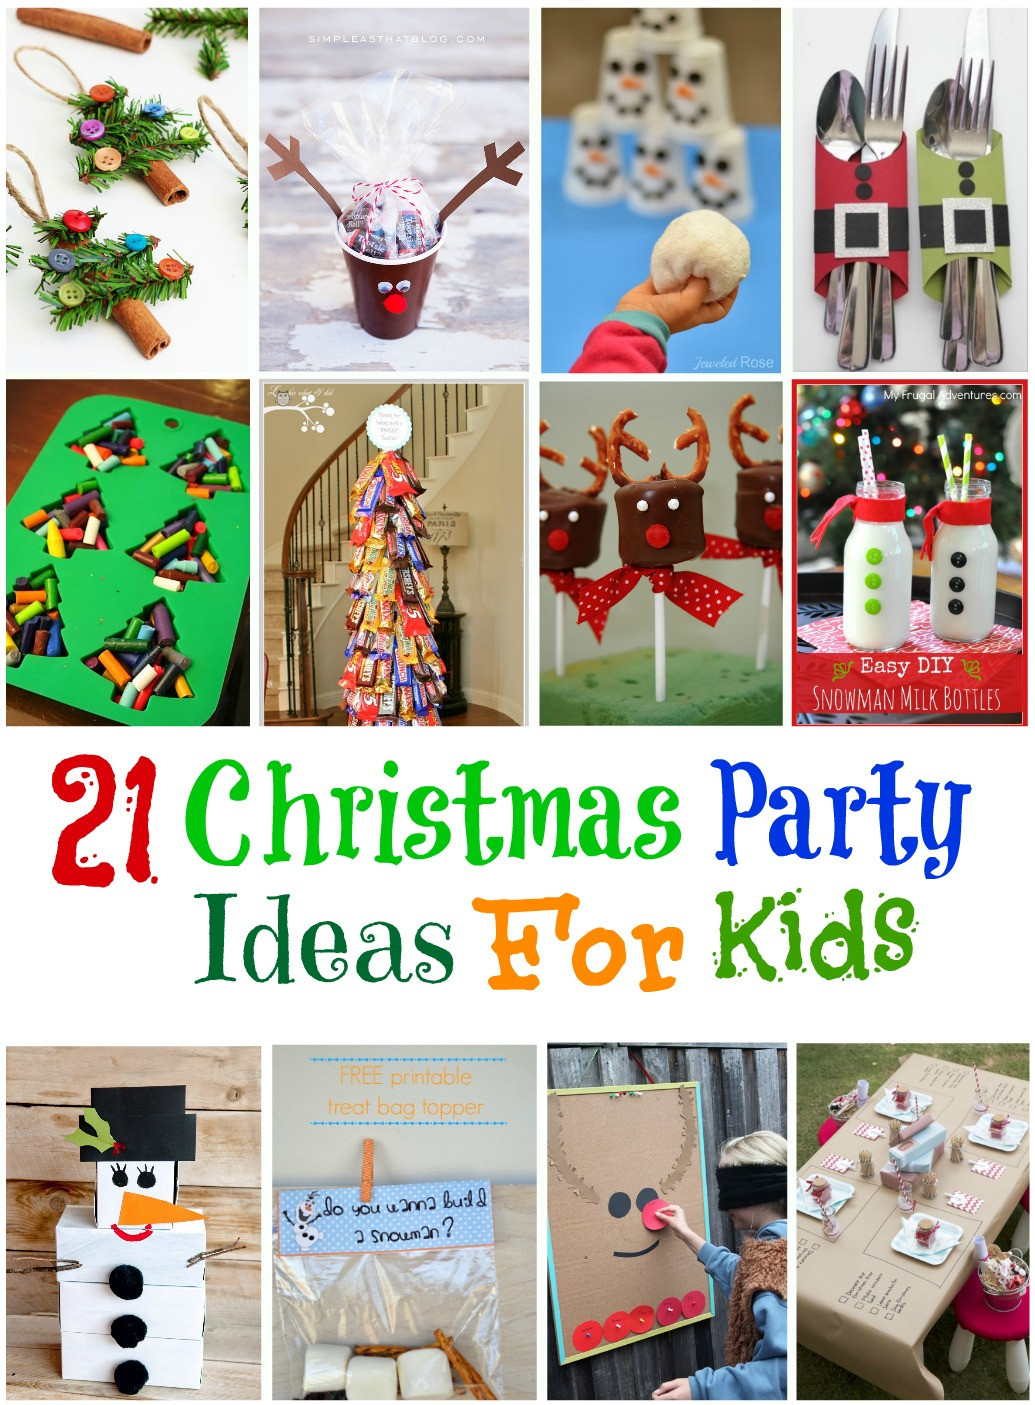 Youth Christmas Party Ideas
 20 Frozen Birthday Party Ideas